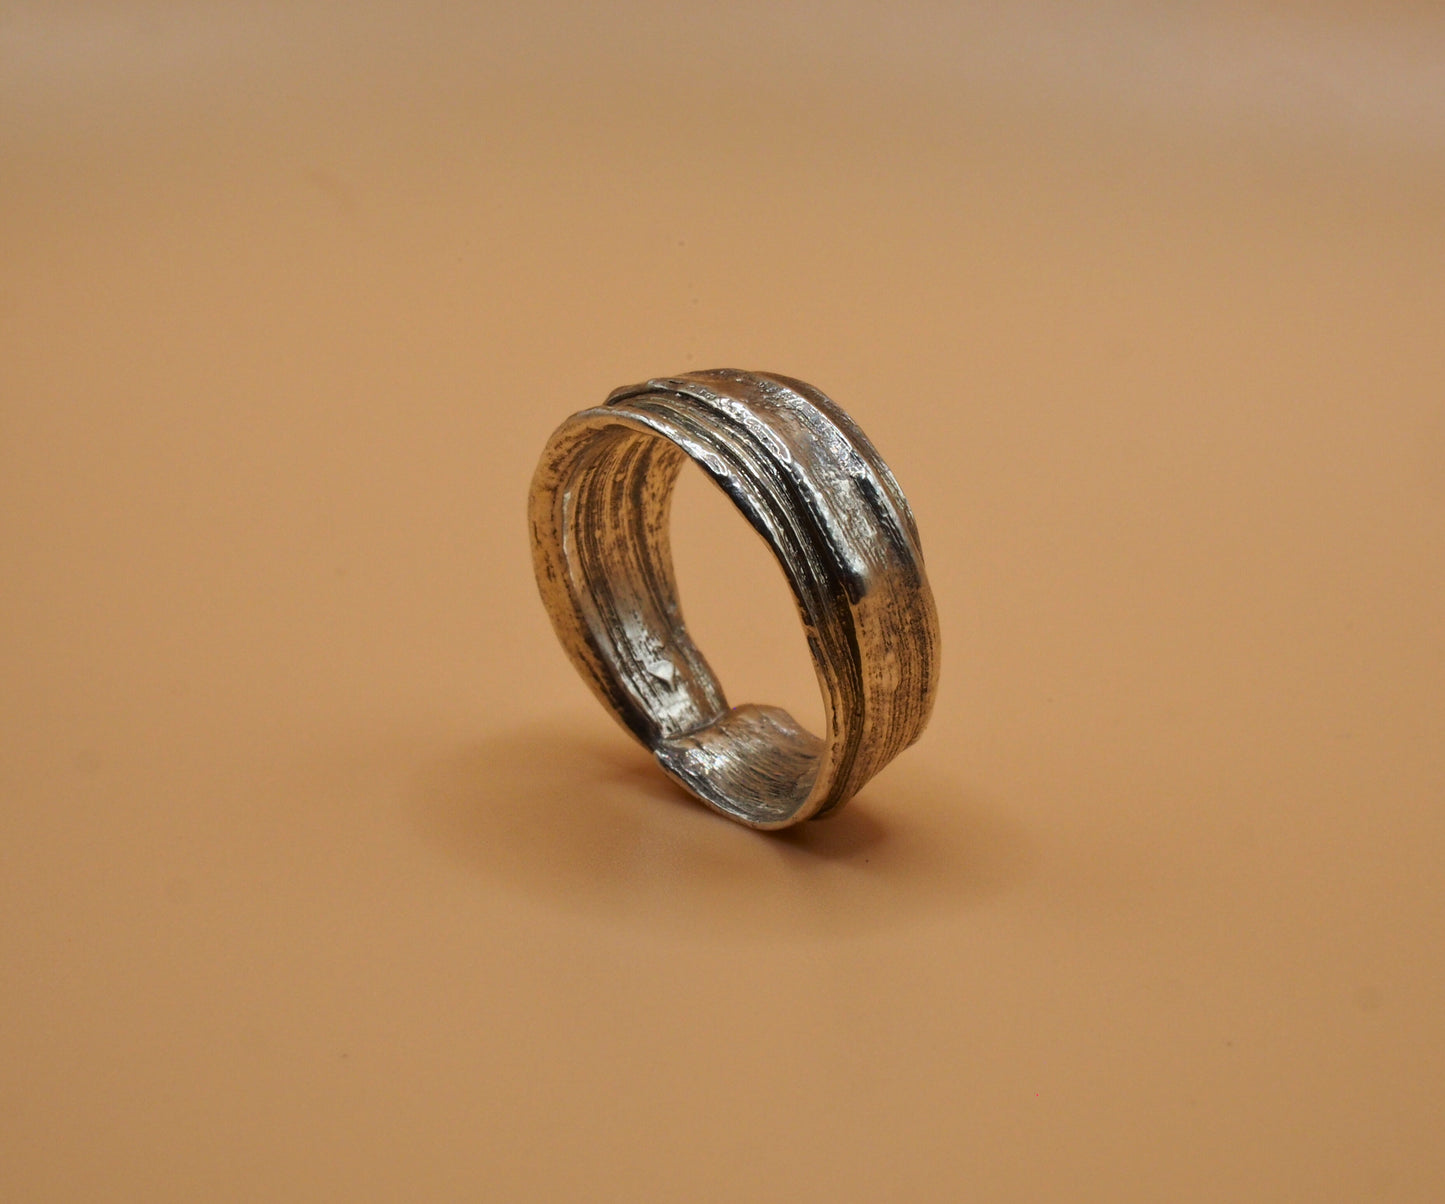 Silver sculptural ring crafted using the Mitsuro Hikime technique by Soul Full Studio. 